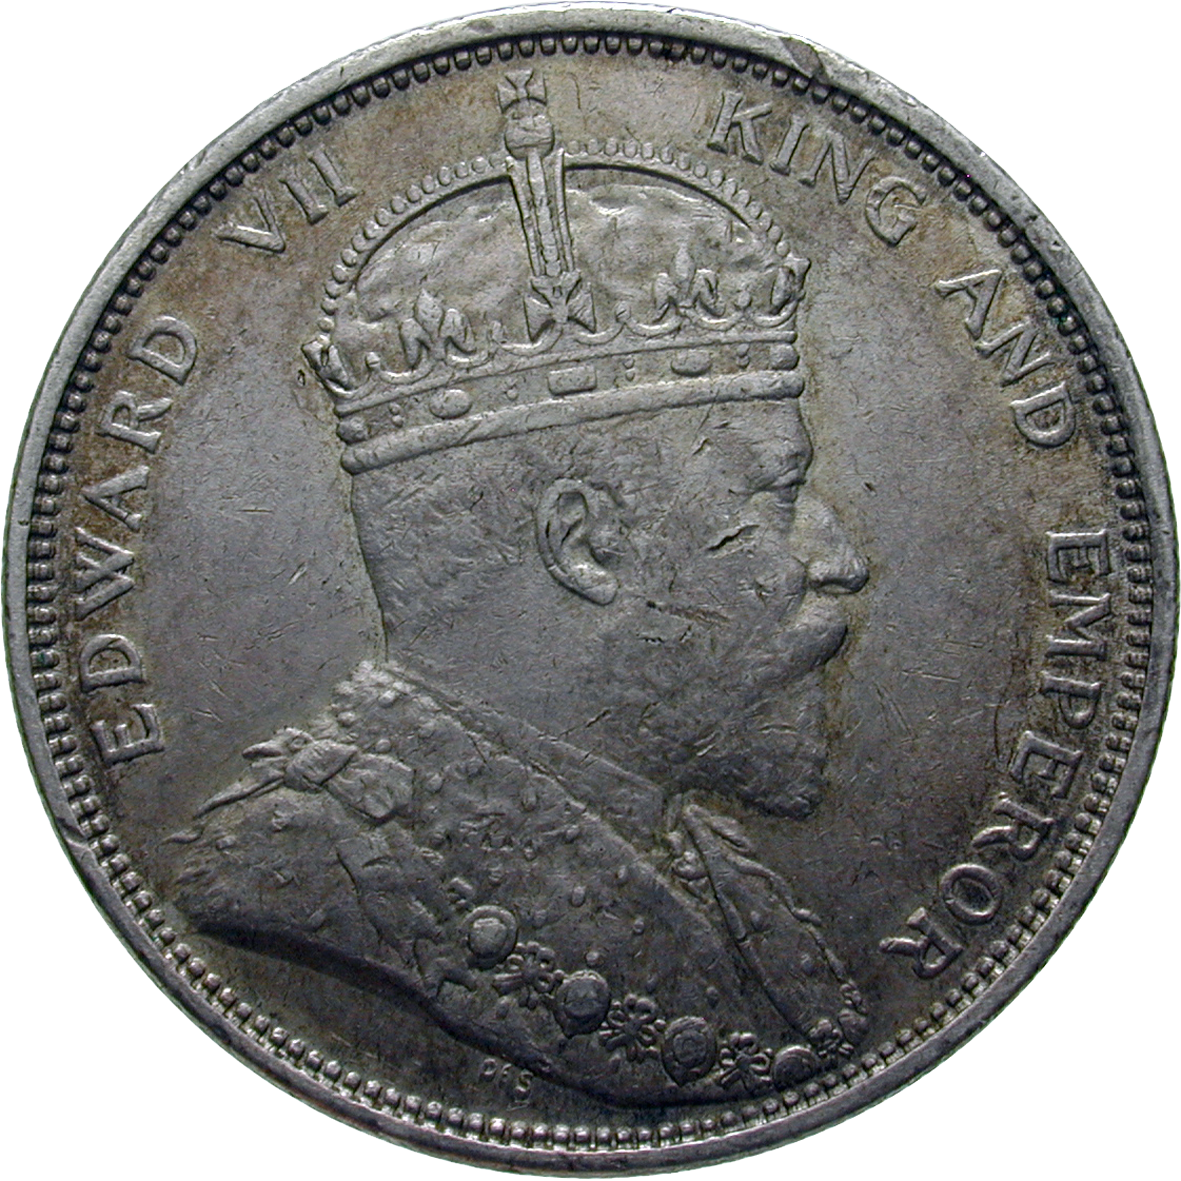 United Kingdom of Great Britain for the Straits Settlements, Edward VII, 1 Dollar 1904 (obverse)